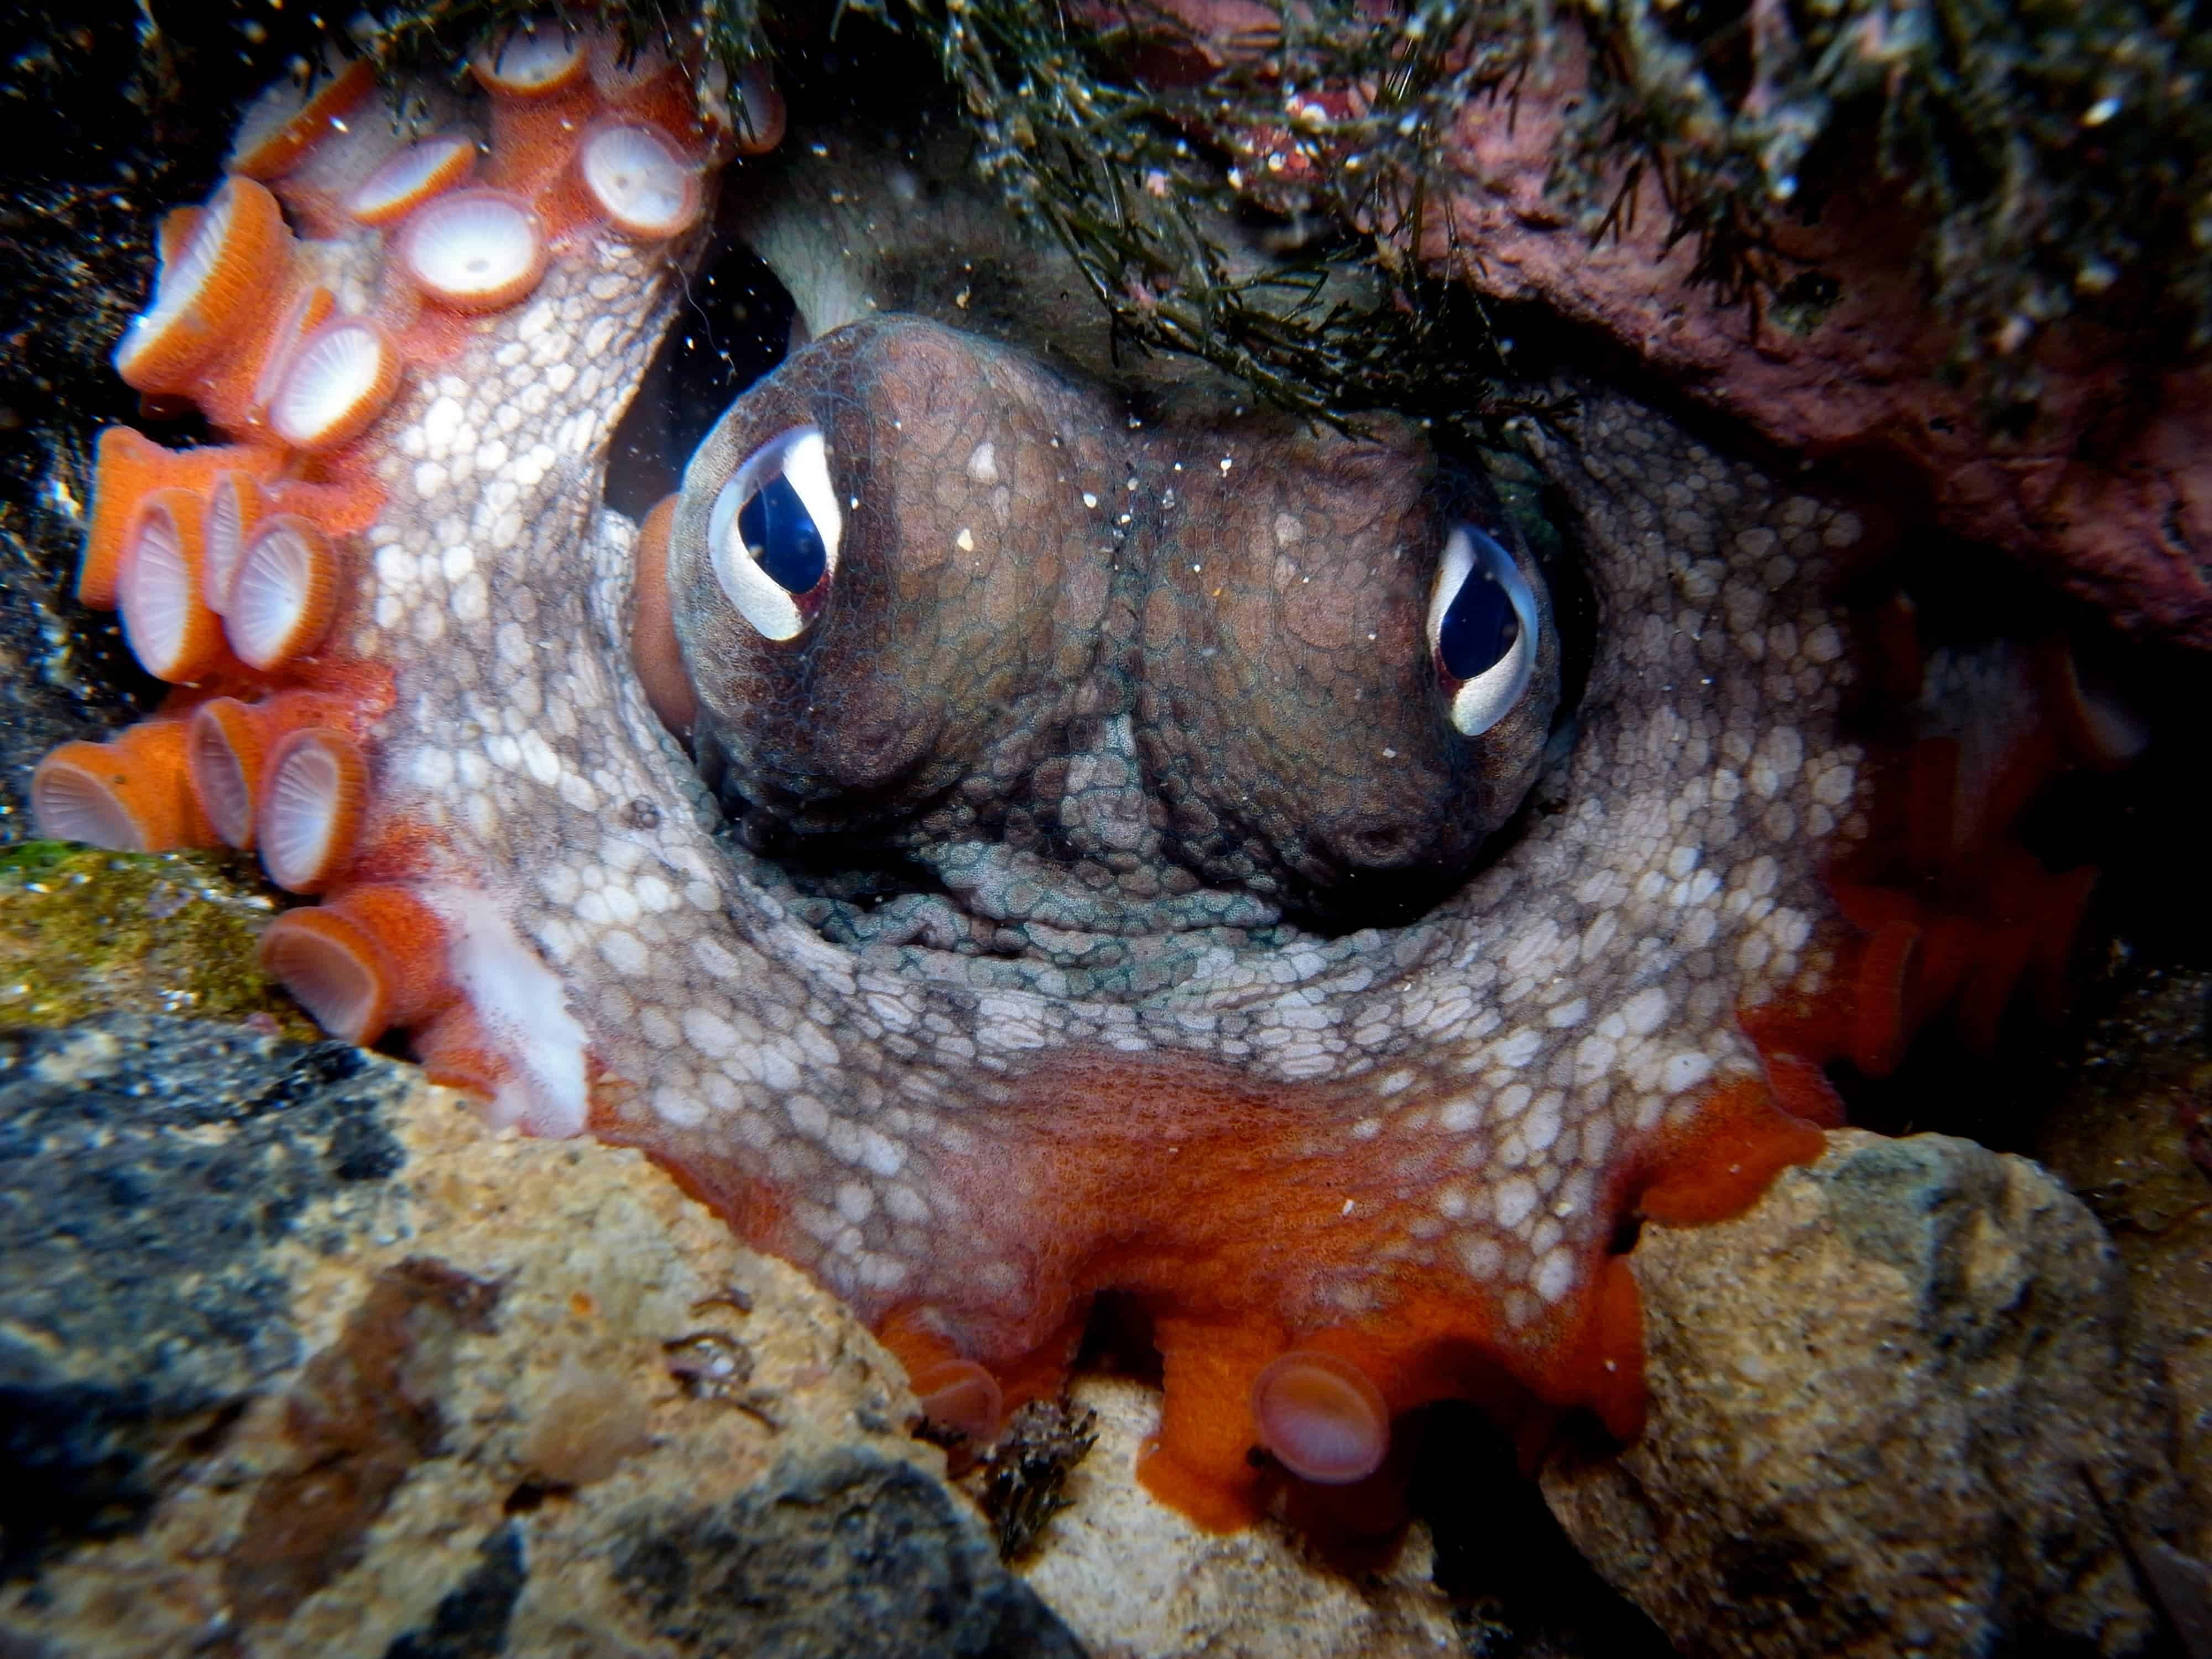 Octopus tetricus is hiding under a rock in Clovelly Pool, Sydney, NSW, Australia (not from this study). Image credits: Sylke Rohrlach.